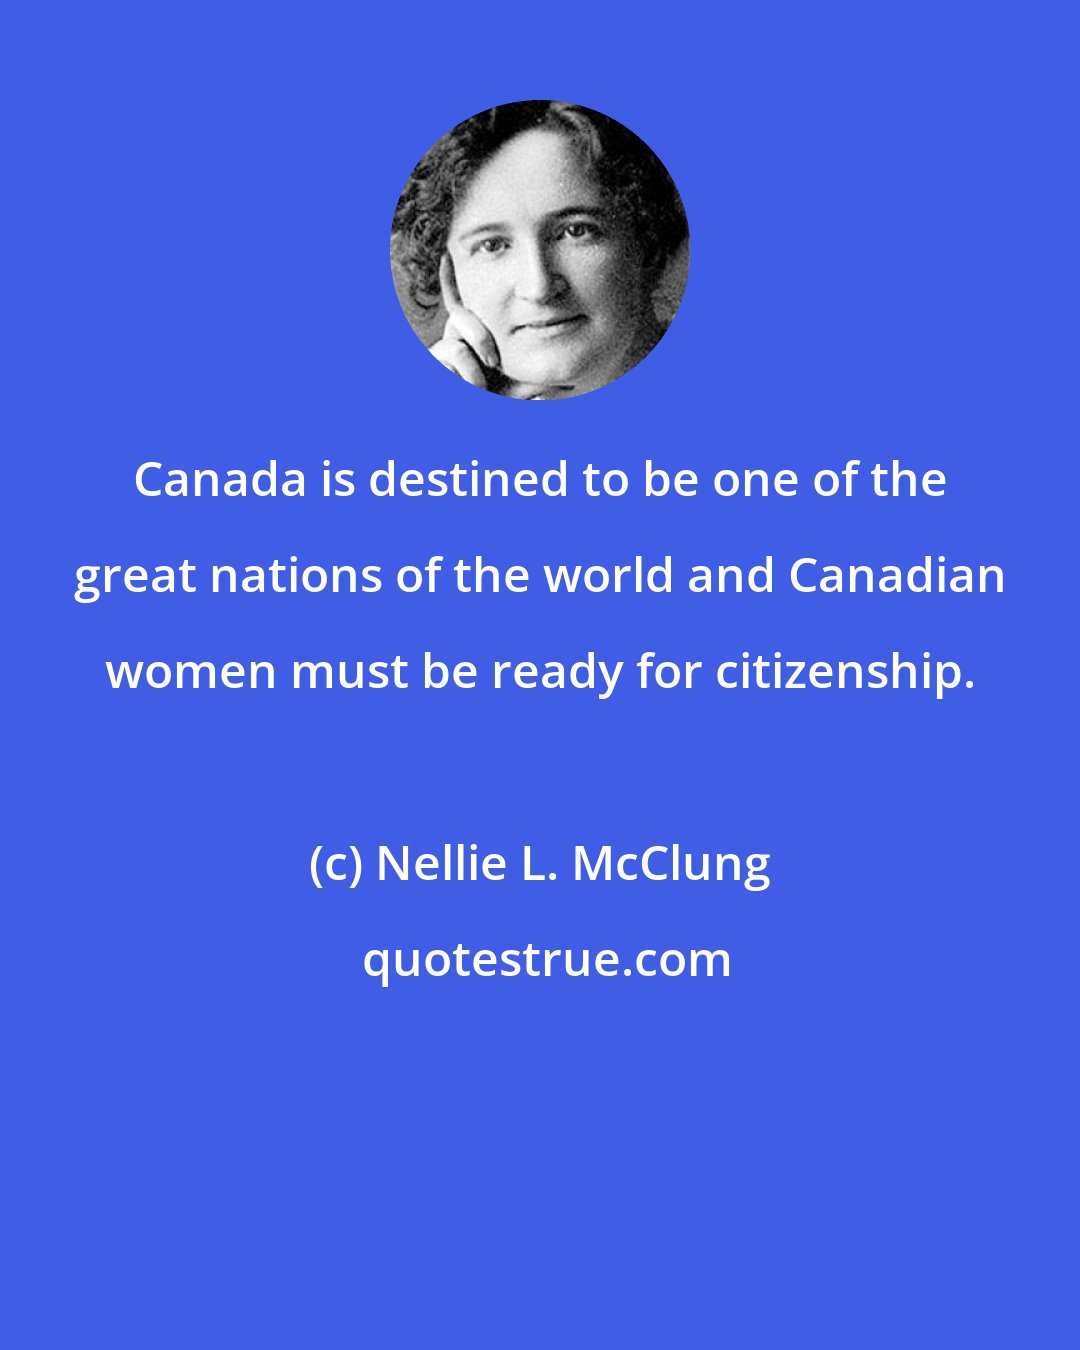 Nellie L. McClung: Canada is destined to be one of the great nations of the world and Canadian women must be ready for citizenship.